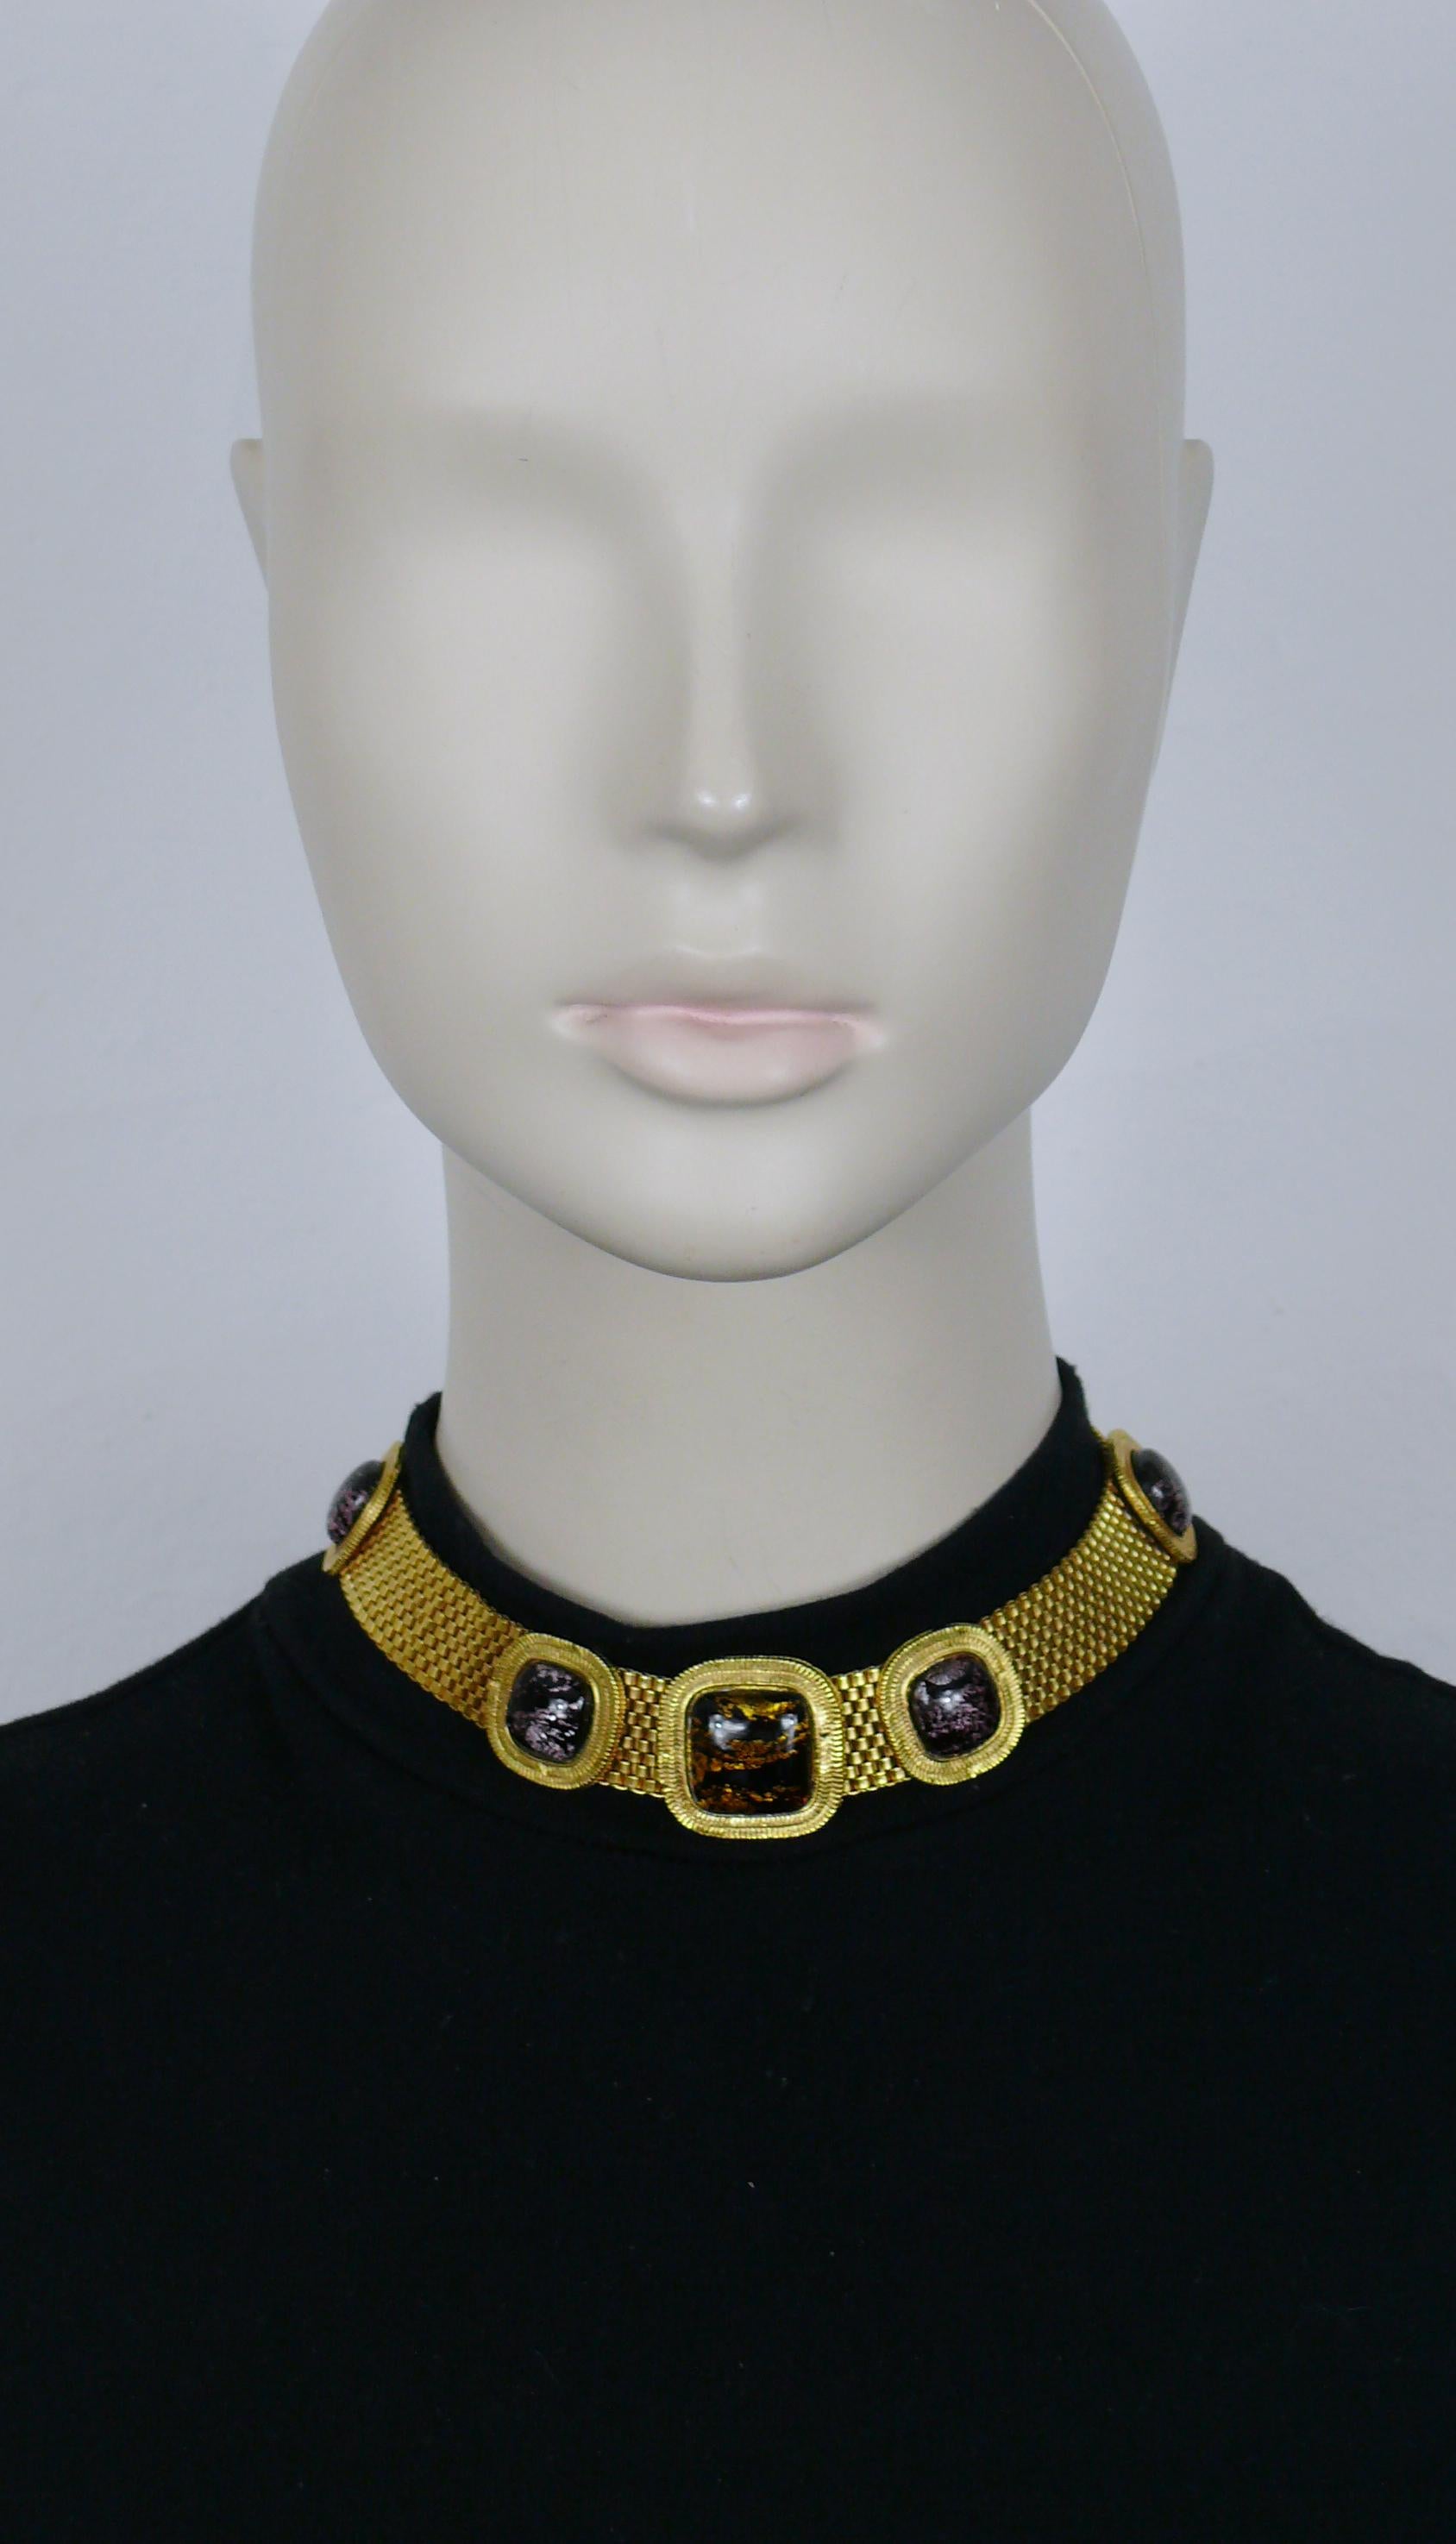 YVES SAINT LAURENT vintage gold tone mesh choker necklace embellished with five glass cabochons.

Adjustable hook clasp closure.

Embossed YVES SAINT LAURENT Rive Gauche Made in France.

Indicative measurements : adjustable length from approx. 35 cm